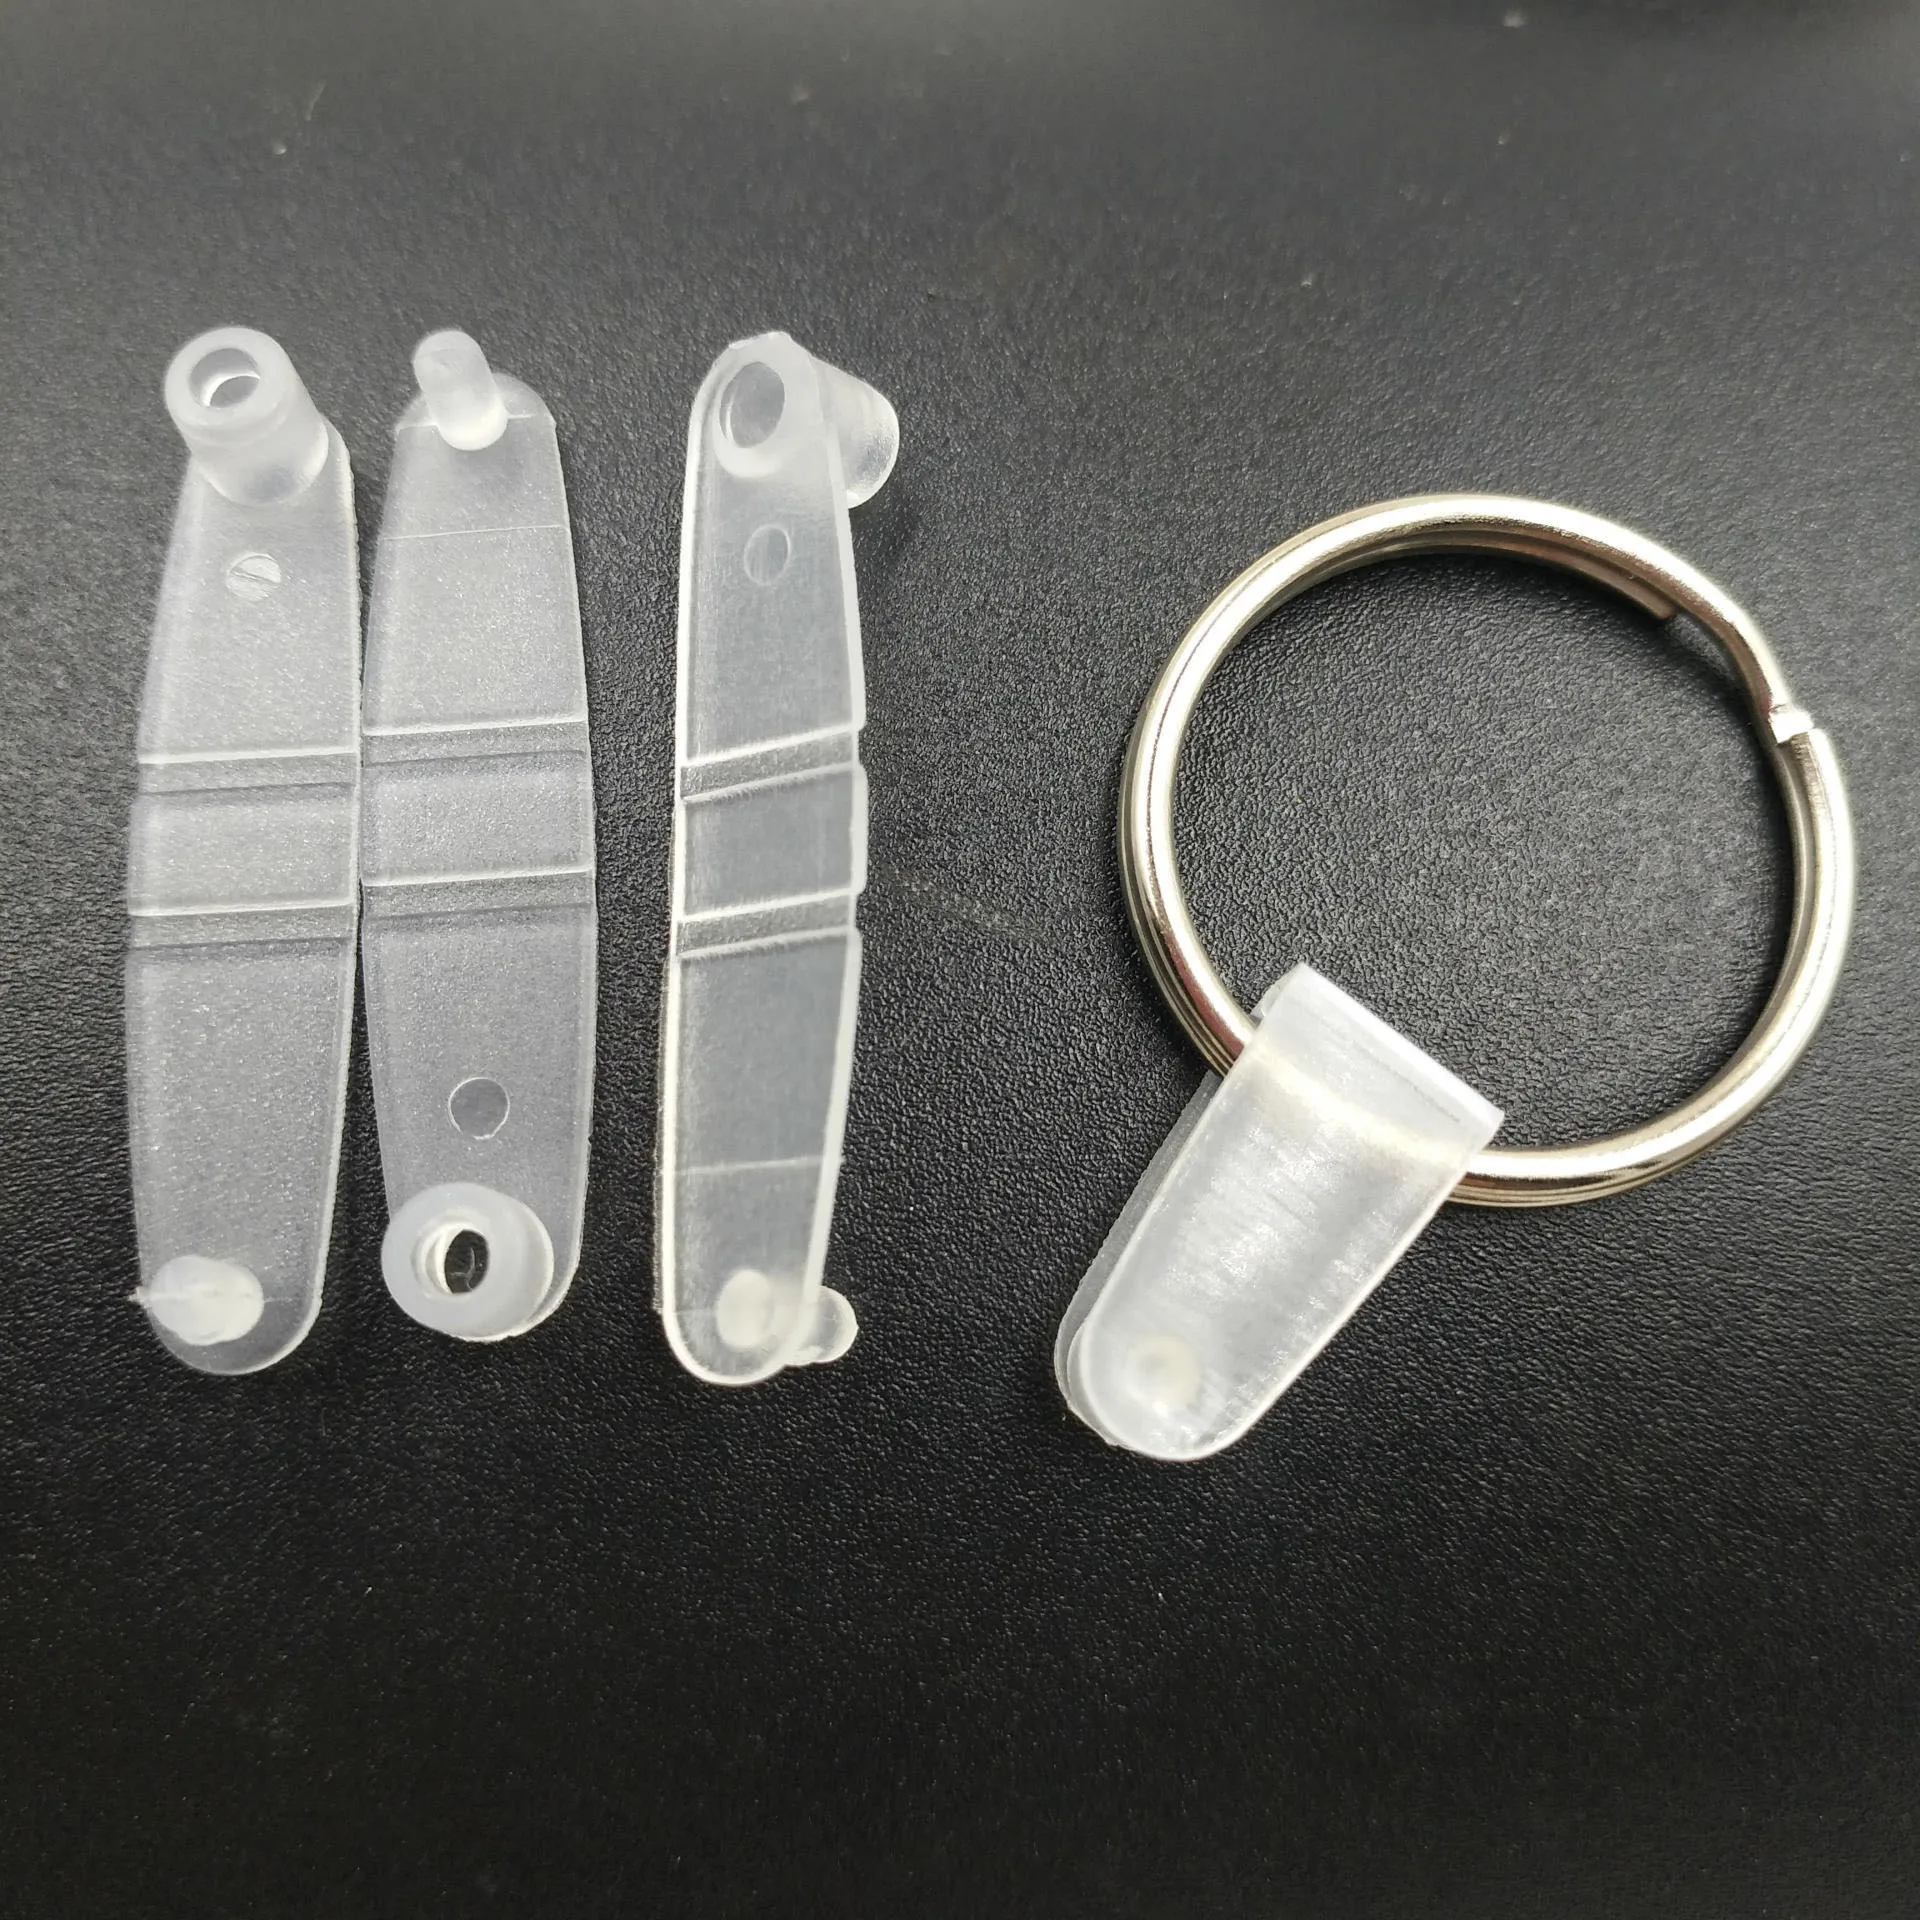 

Meetee LCH-180 Plastic Clips Key Chains Accessories Pp Folding Buckle Connector For Keyrings Clear Snap Clip Transparent Opp Bag